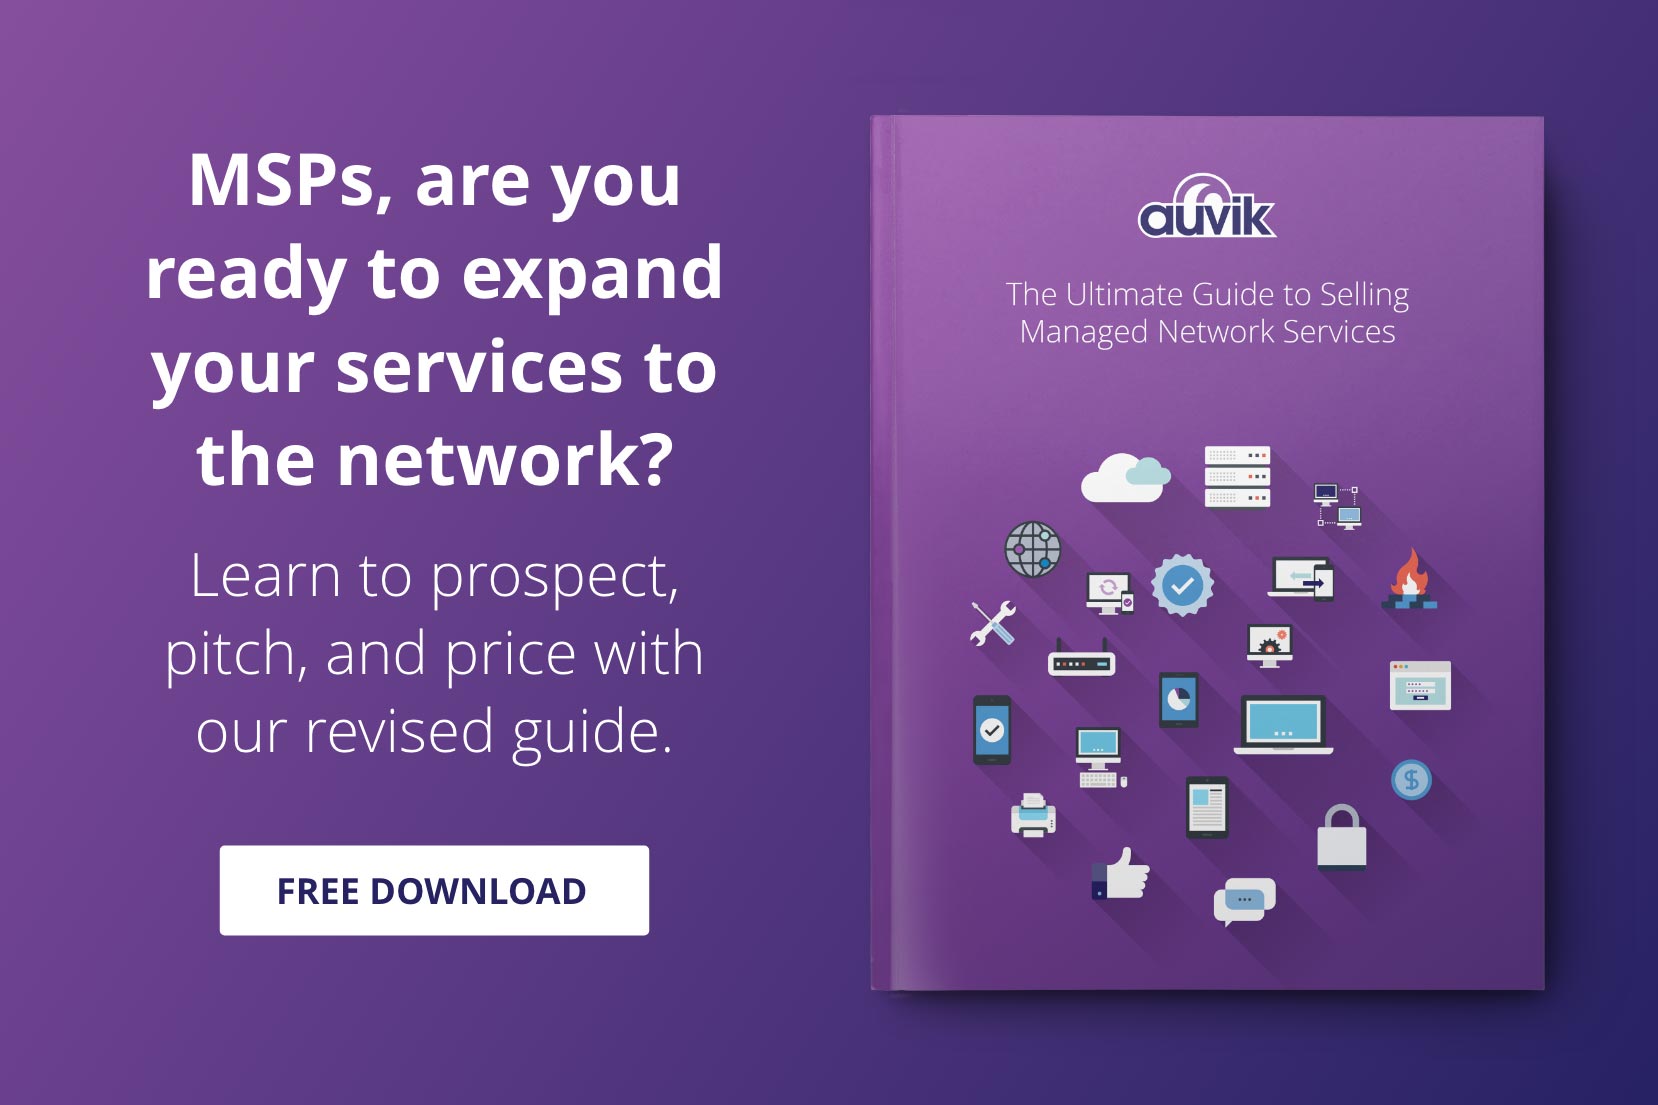 The Ultimate Guide to Selling Network Services - free ebook download